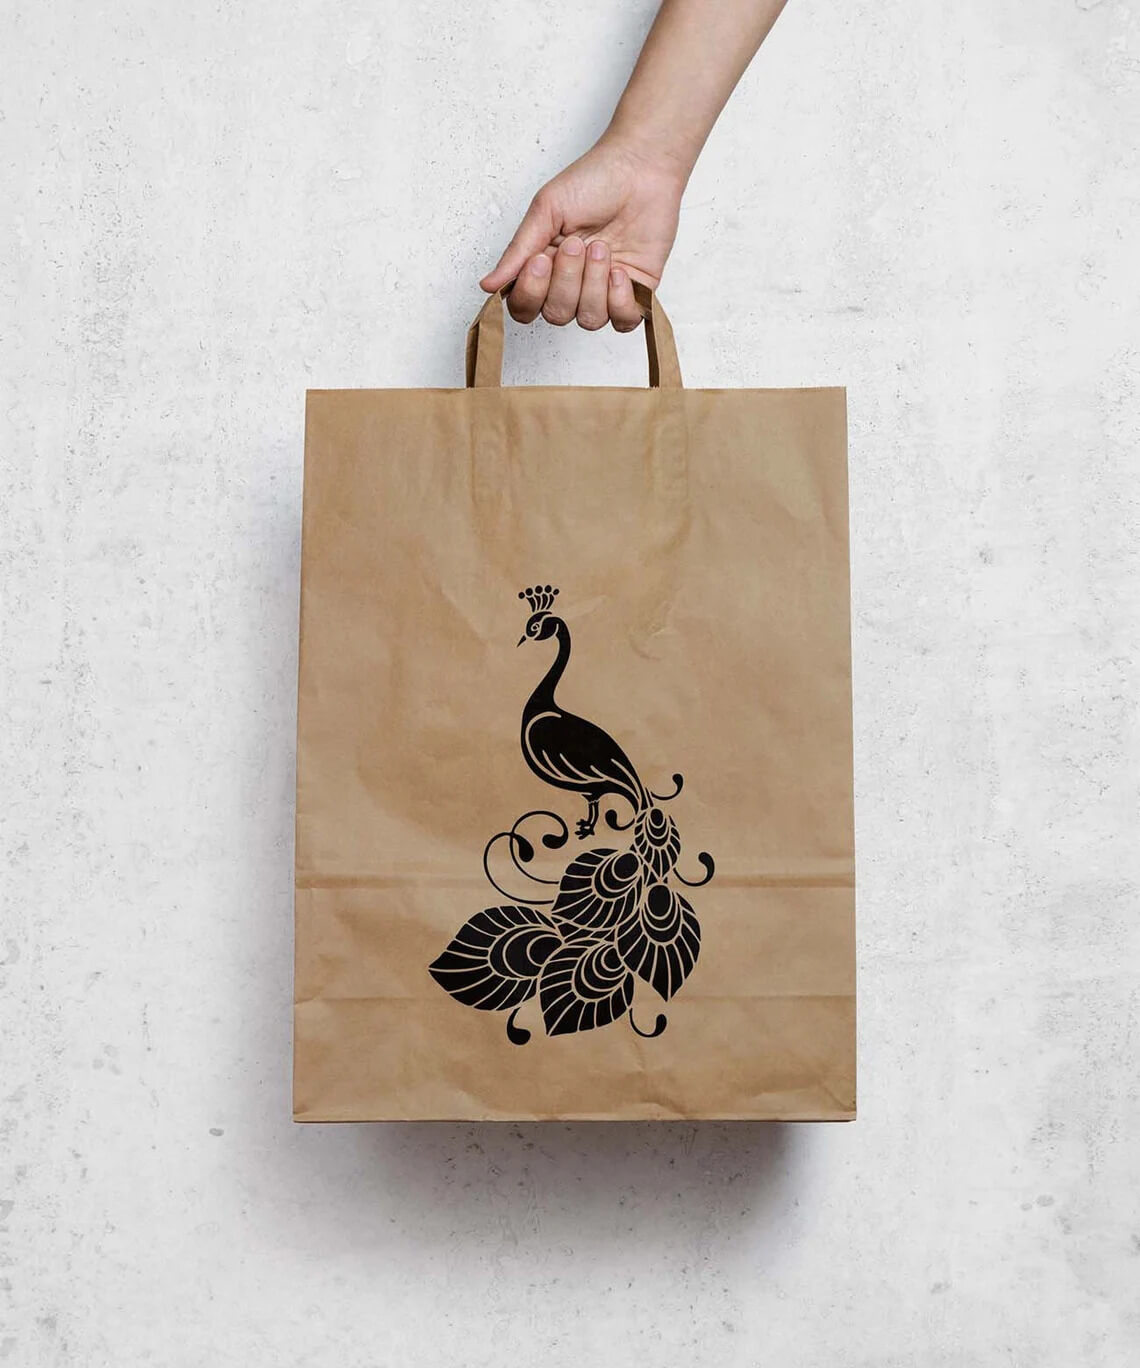 Person holding a brown paper bag with a peacock on it.